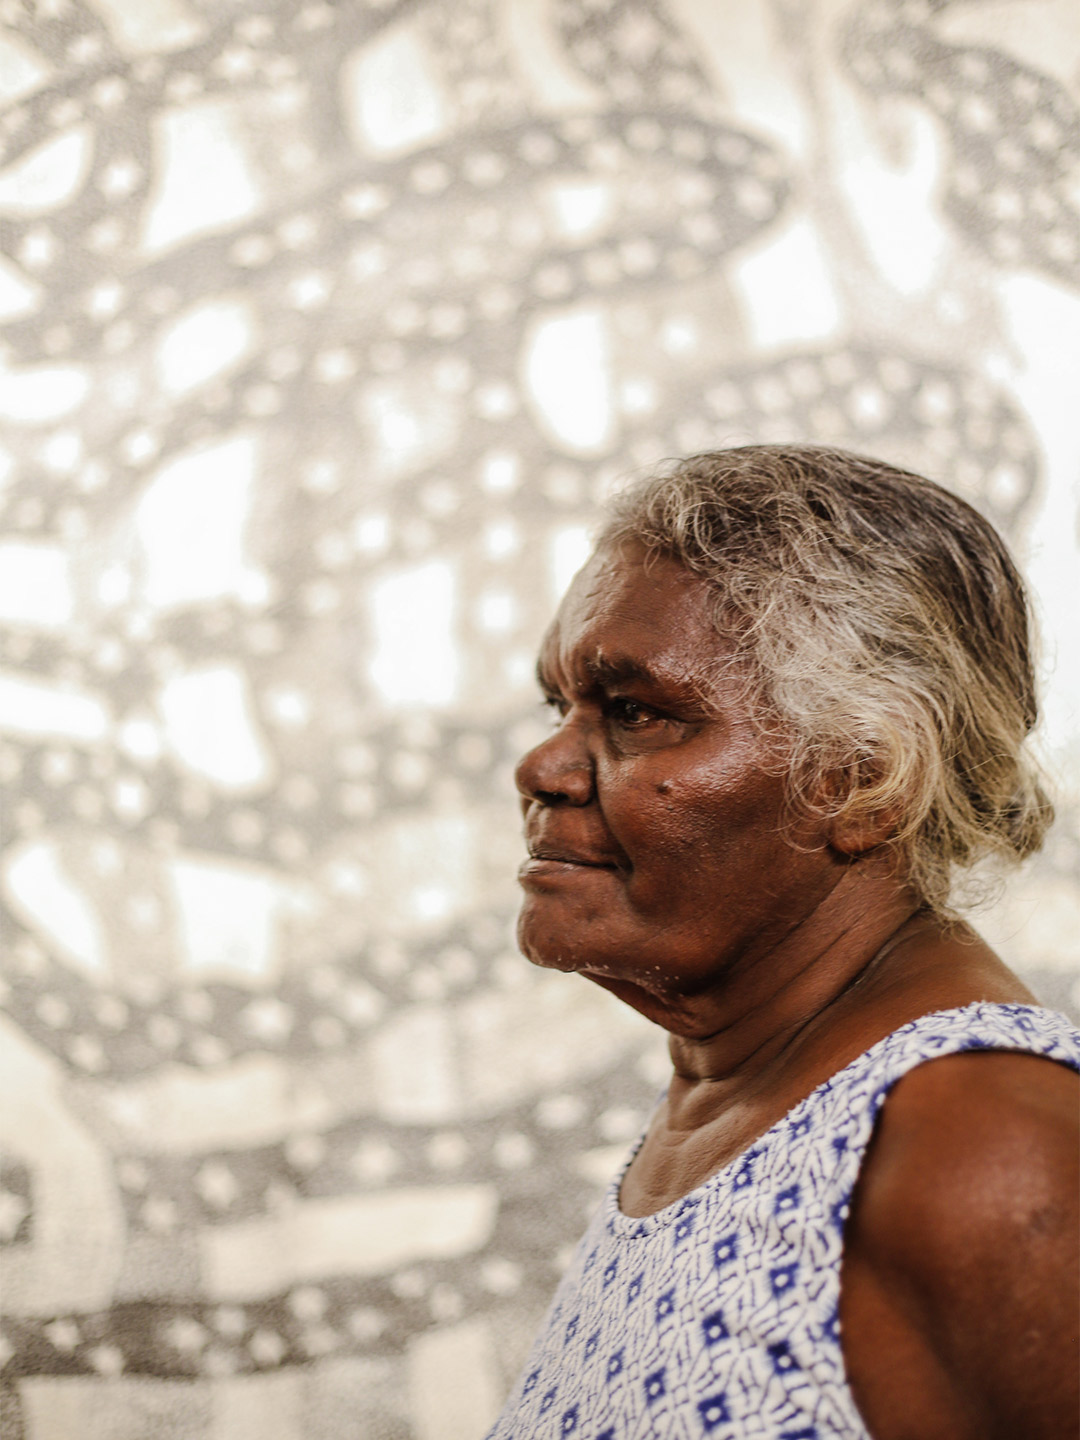 Featuring the work of 11 Yolŋu women artists of north-east Arnhem Land, the 'Bark Ladies' exhibition opens at the NGV this December. 